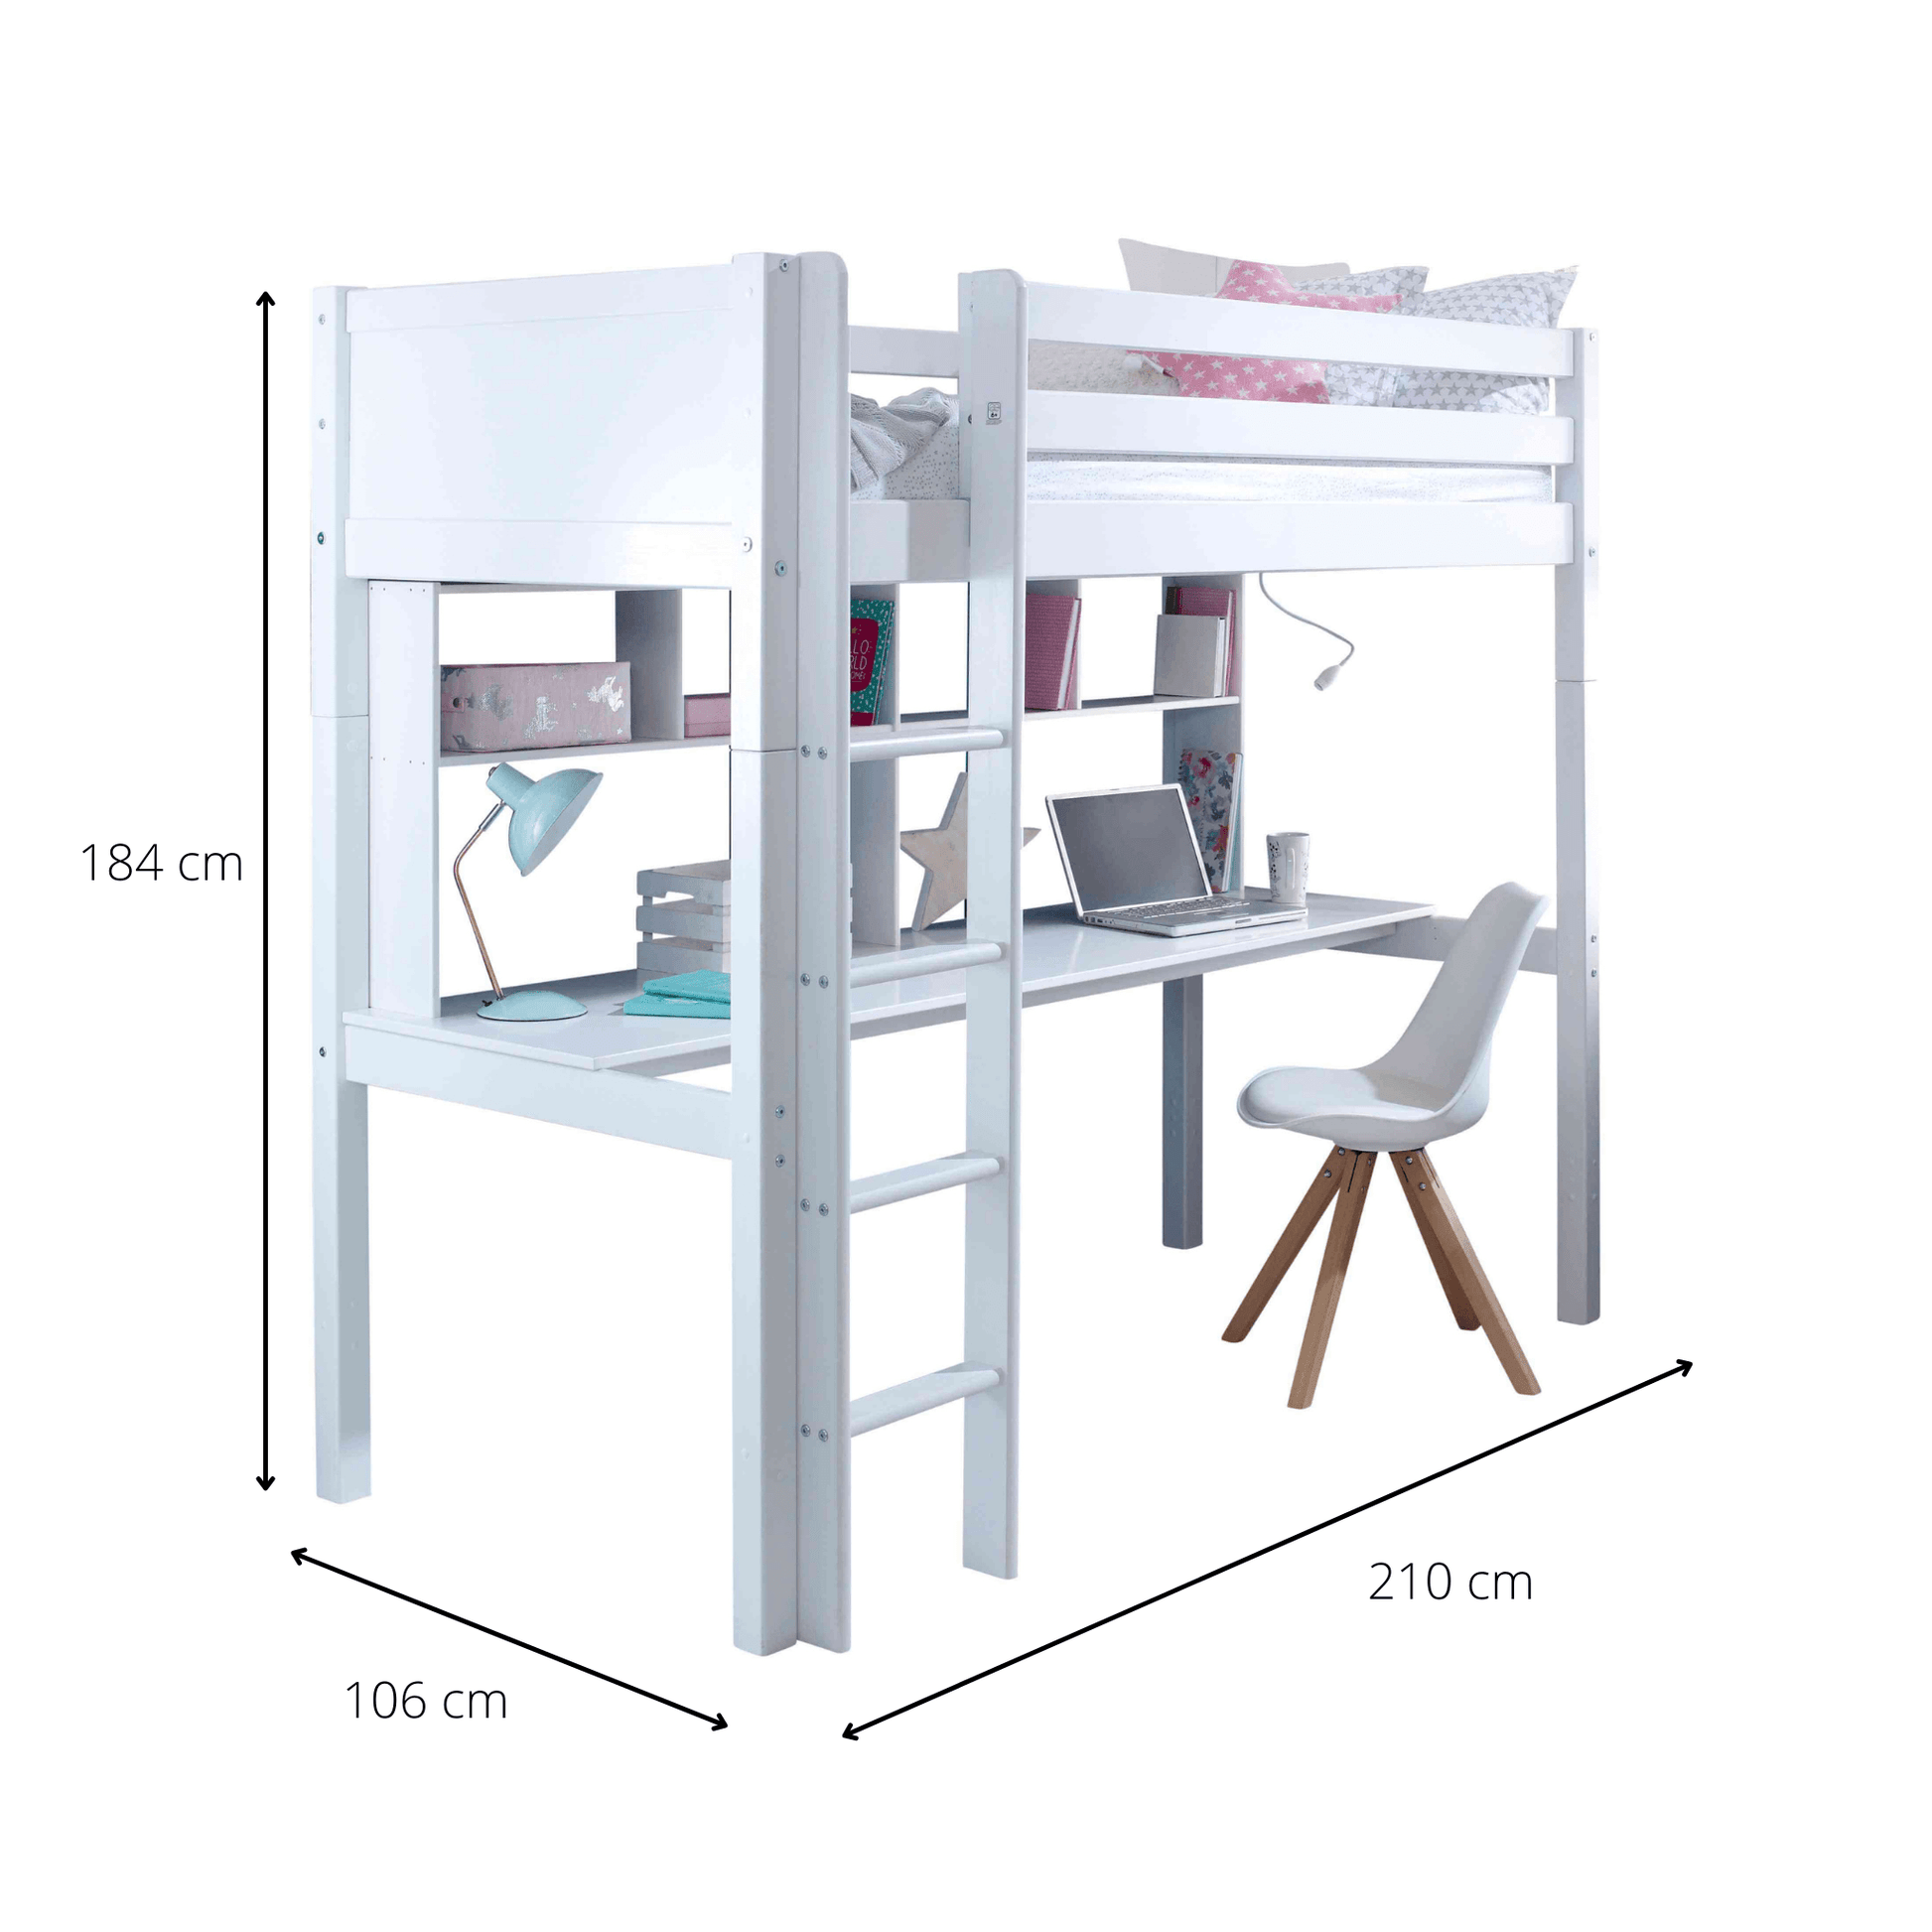 Holly Nordic High Sleeper Bed with Desk & Shelves Dimensions